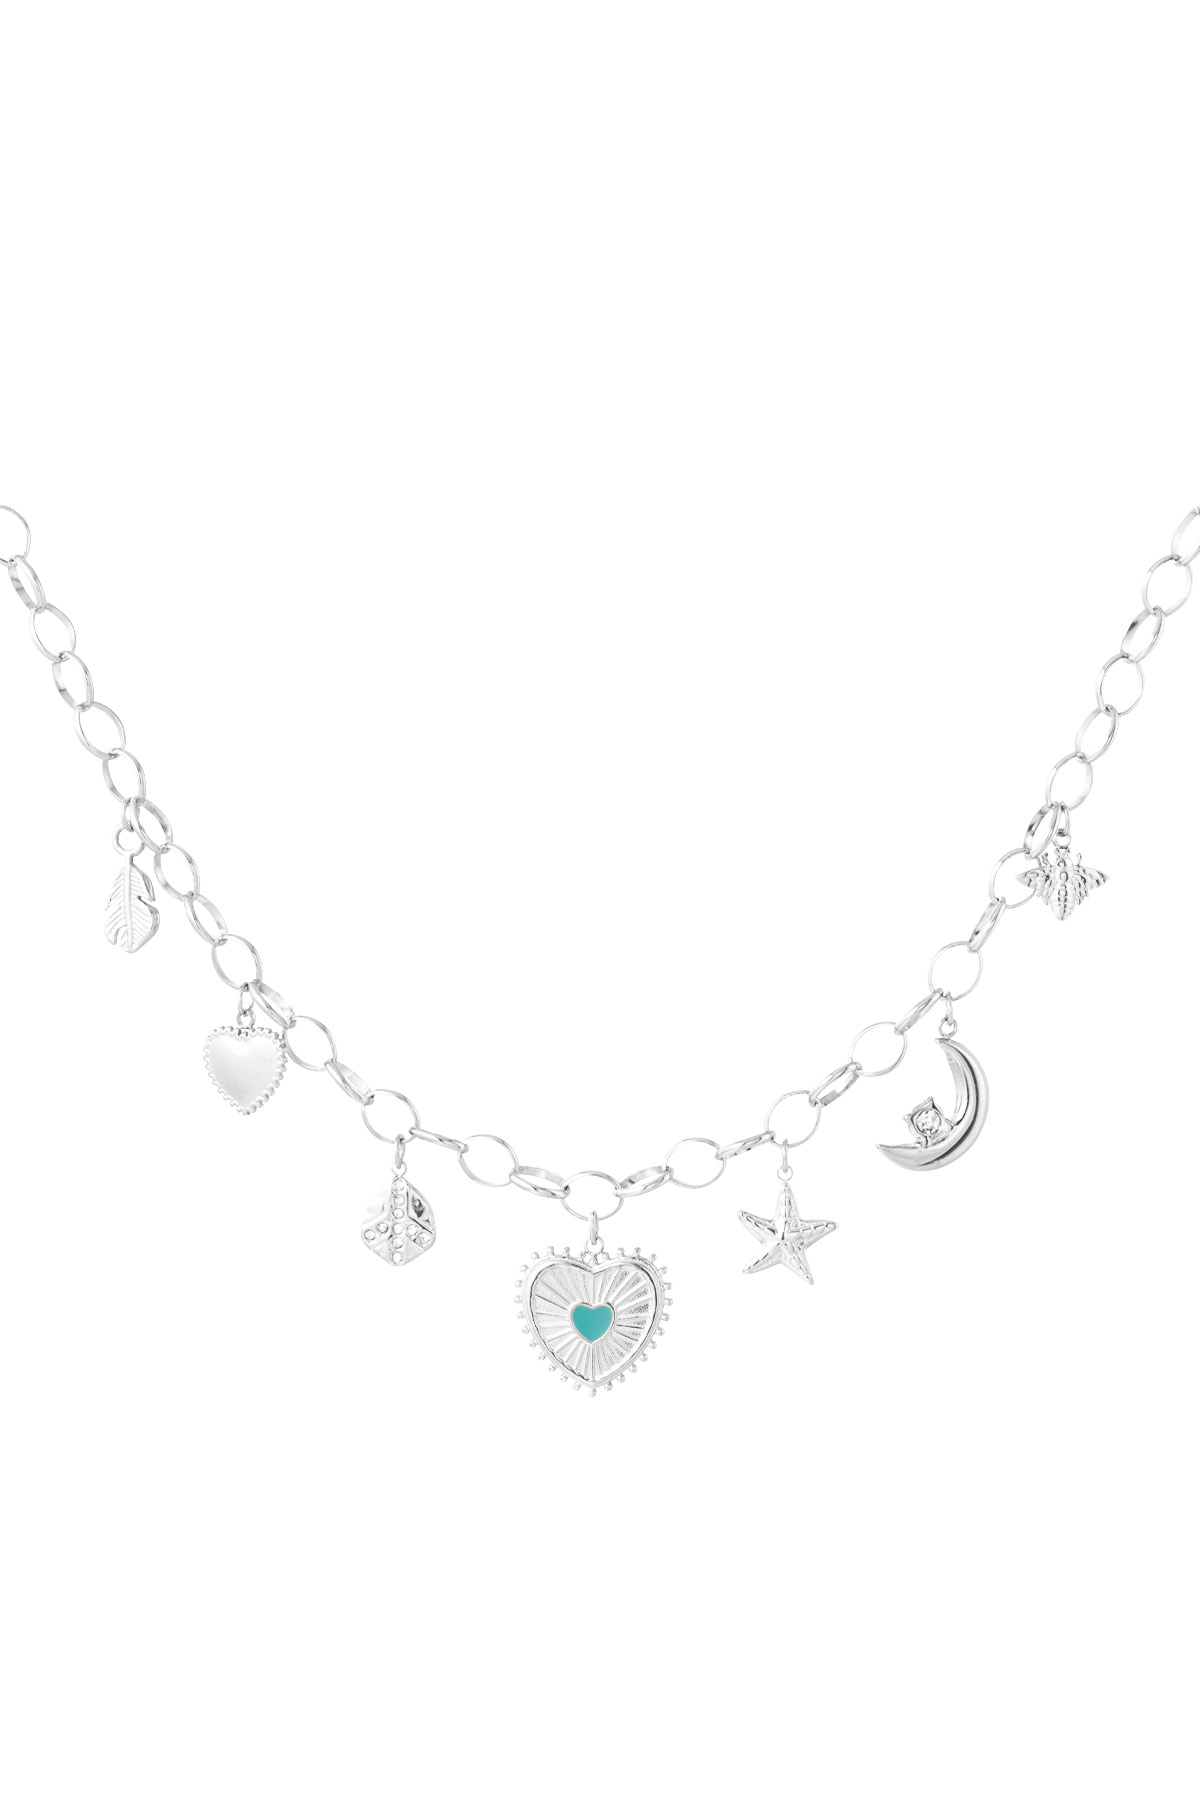 Sunny love charm necklace - silver